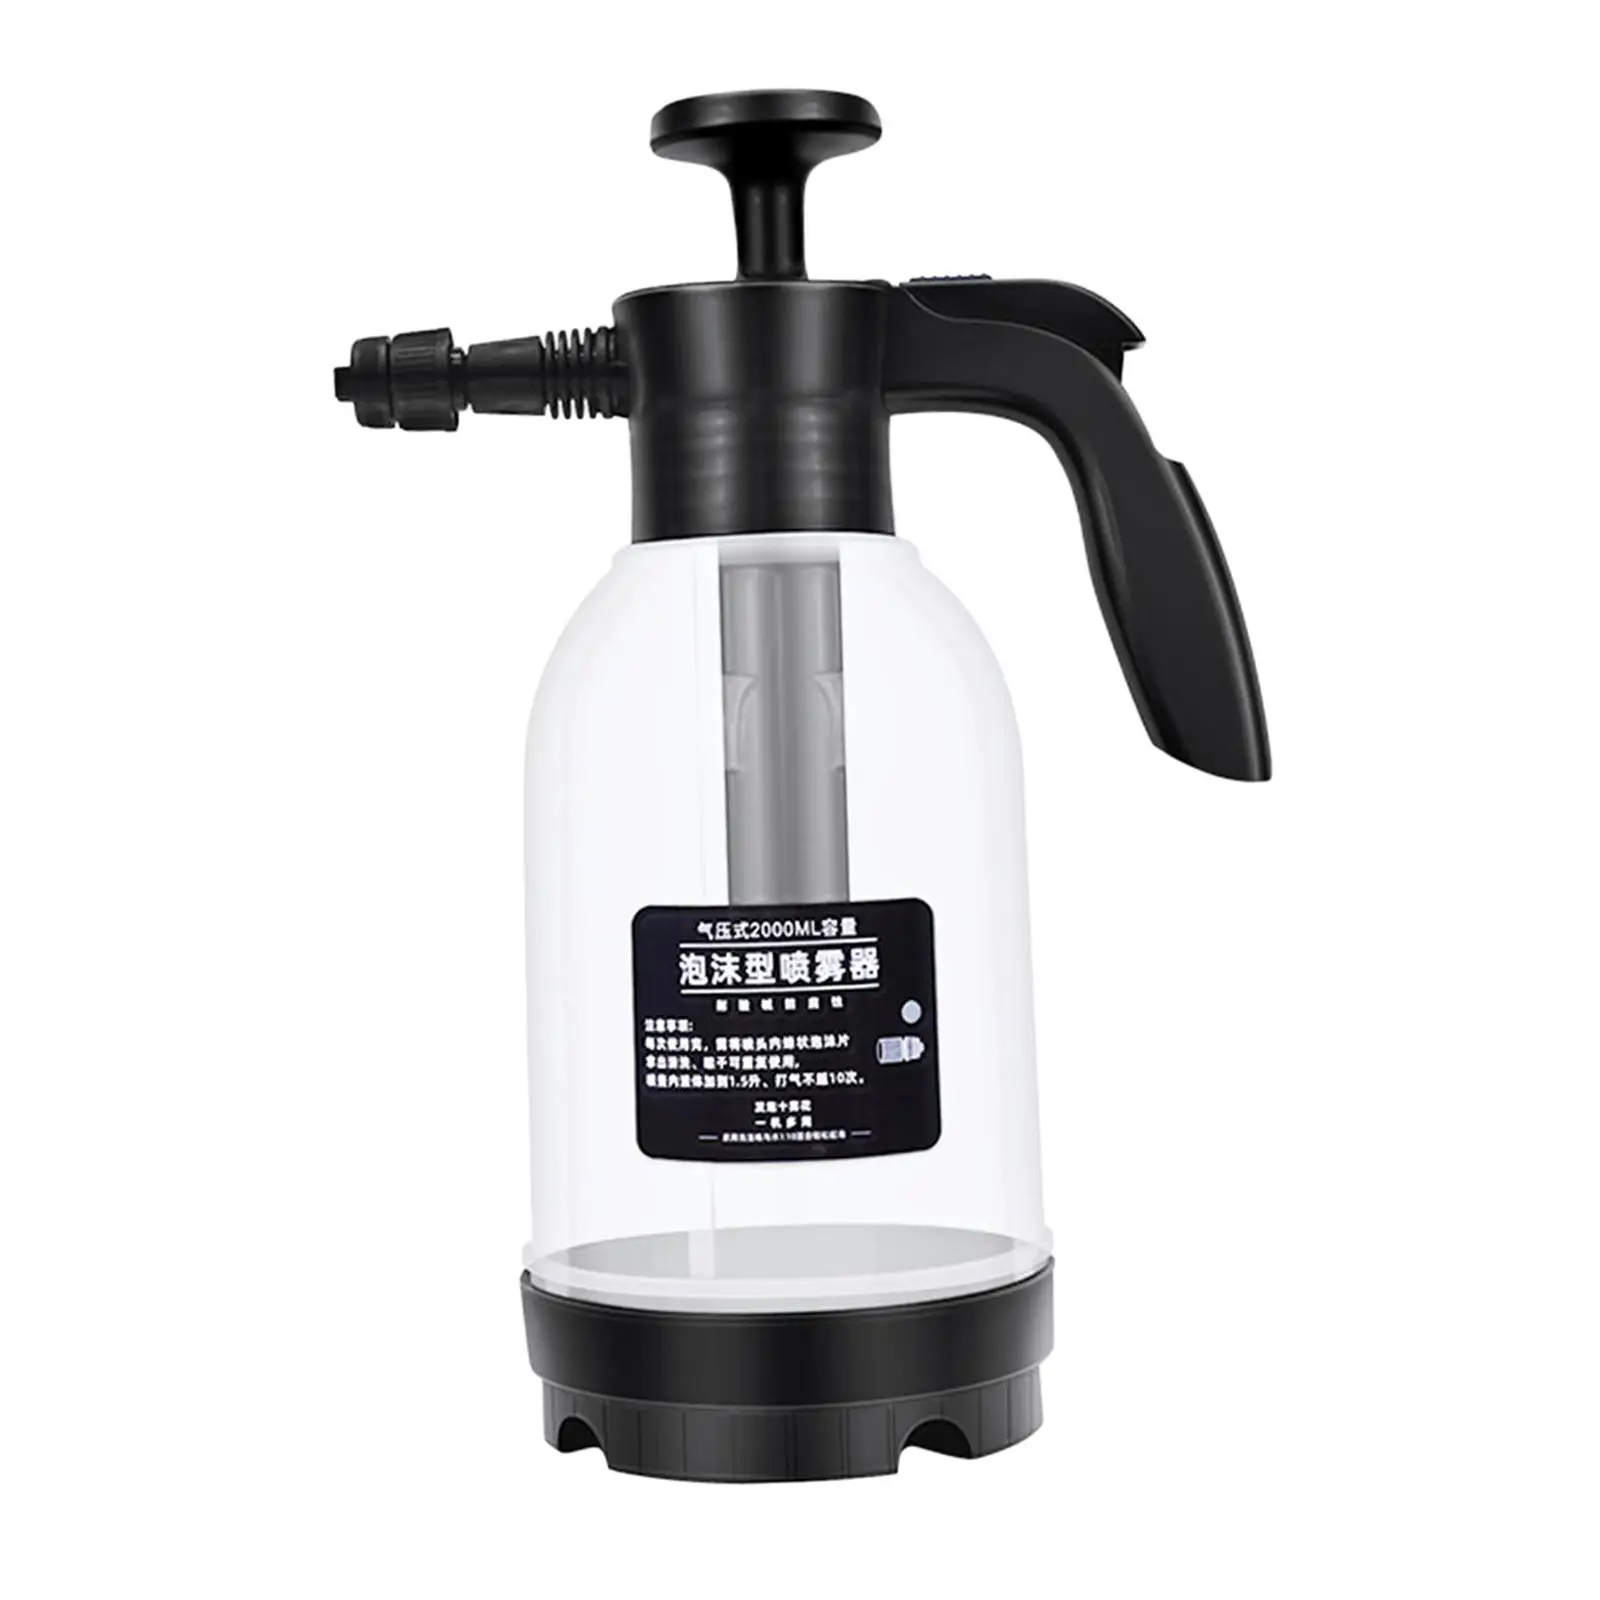 2.0 Wash Pump Manual Foaming Sprayer  Cleaning High Pressure Spraying ,Perfectly for DIY Enthusiasts Continuous Hand Operated